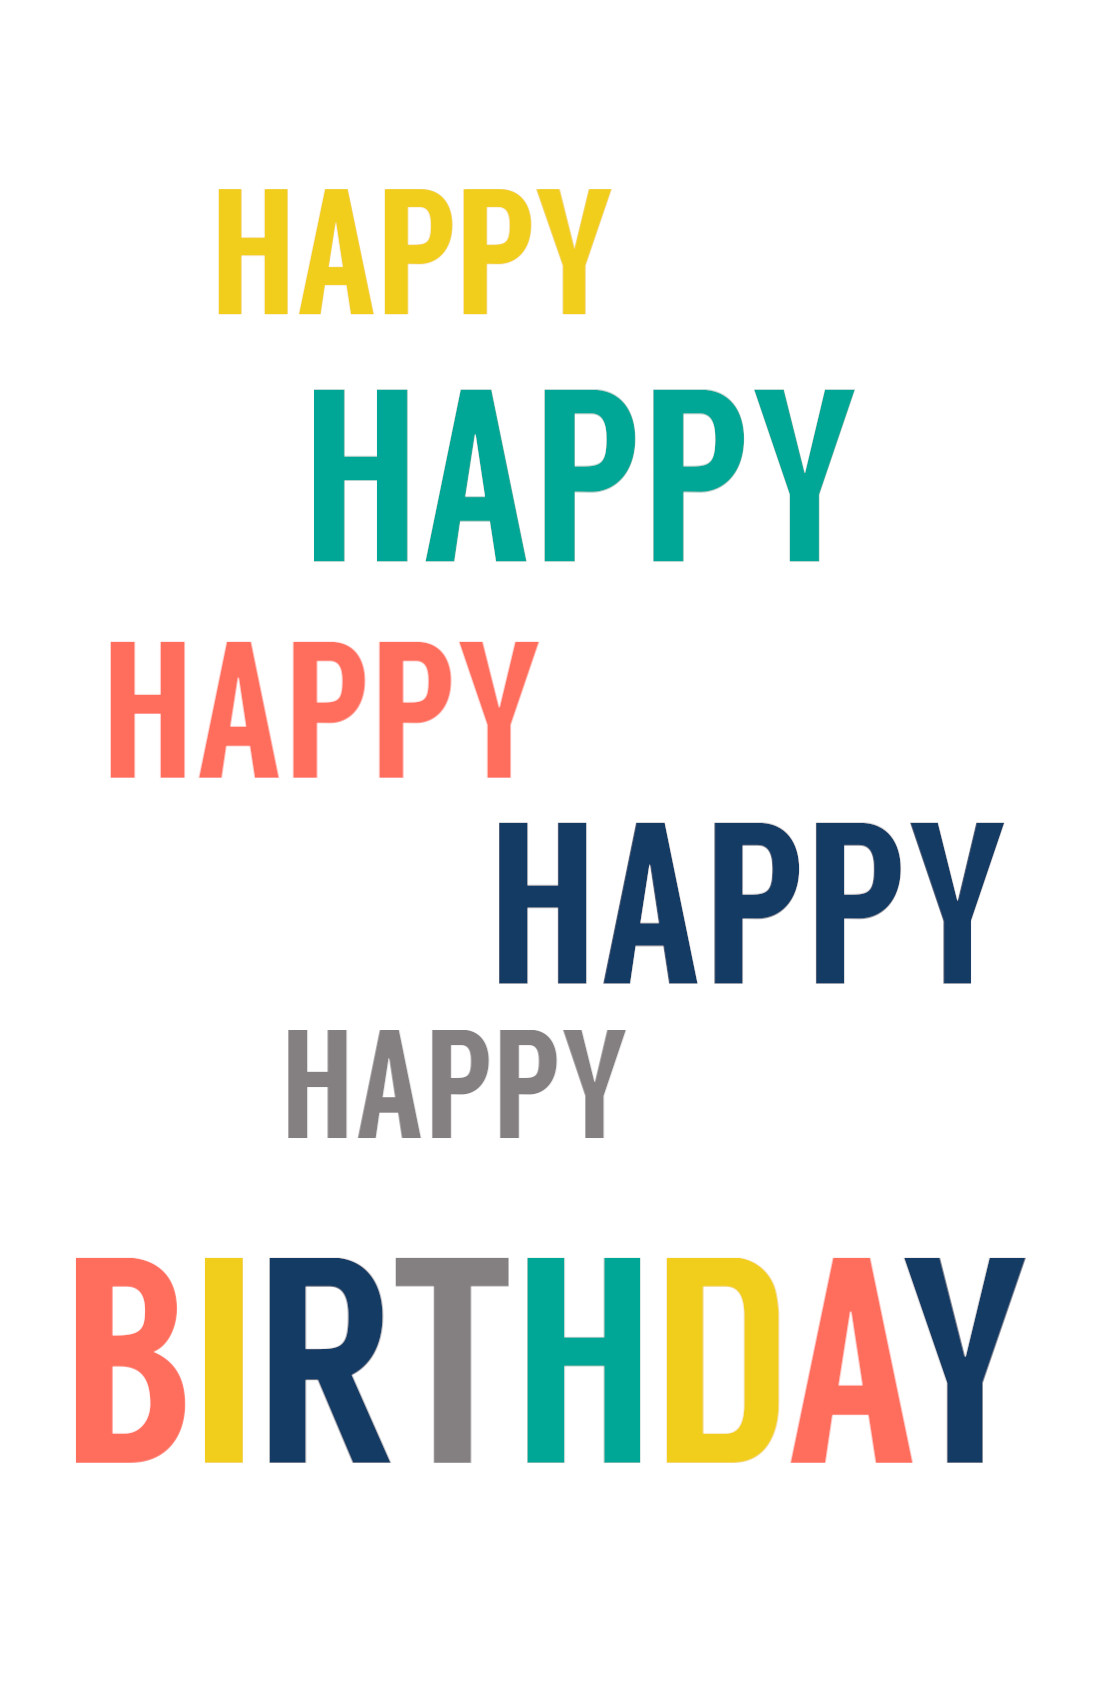 Free Printable Birthday Cards For Adults
 Free Printable Birthday Cards Paper Trail Design